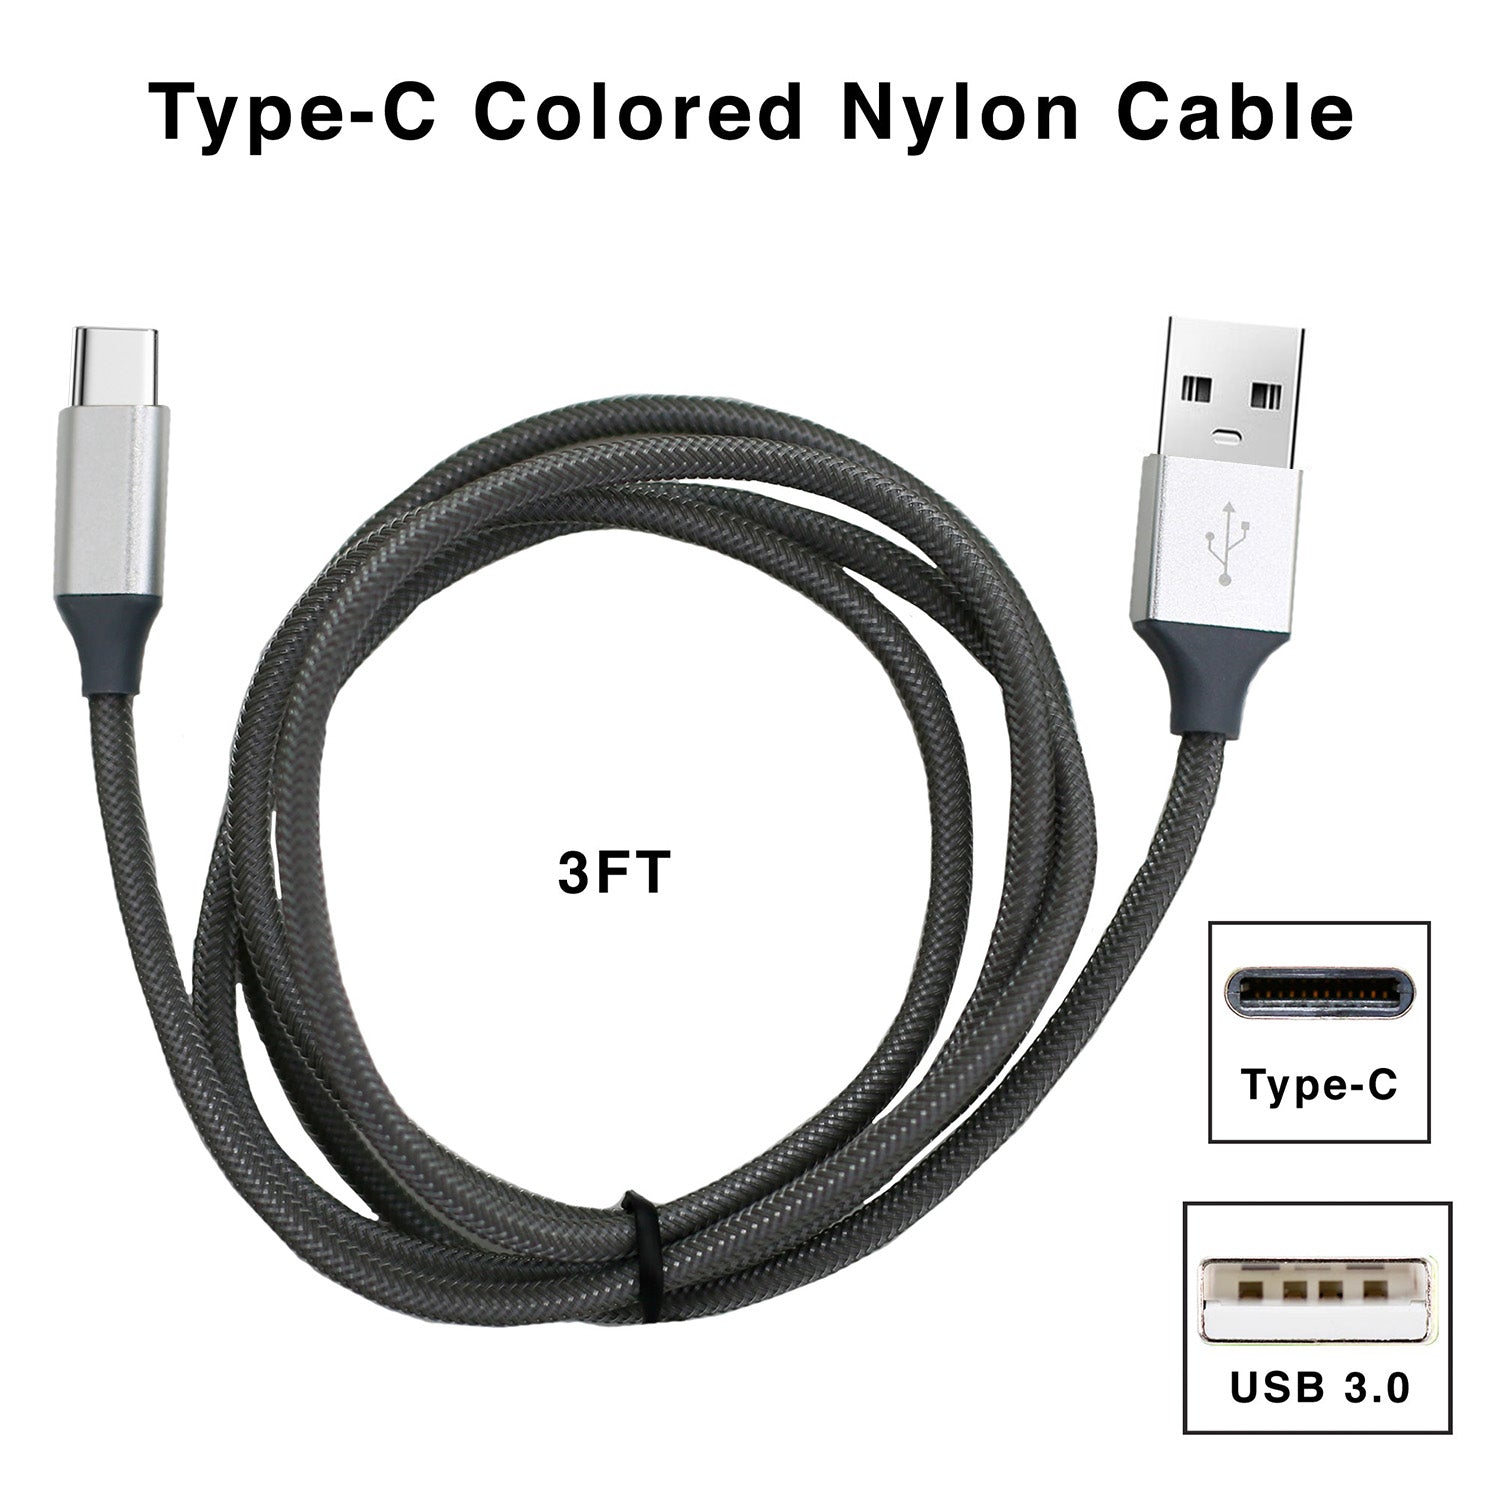 USB Type C Colored Nylon Cable (3FT) Gray